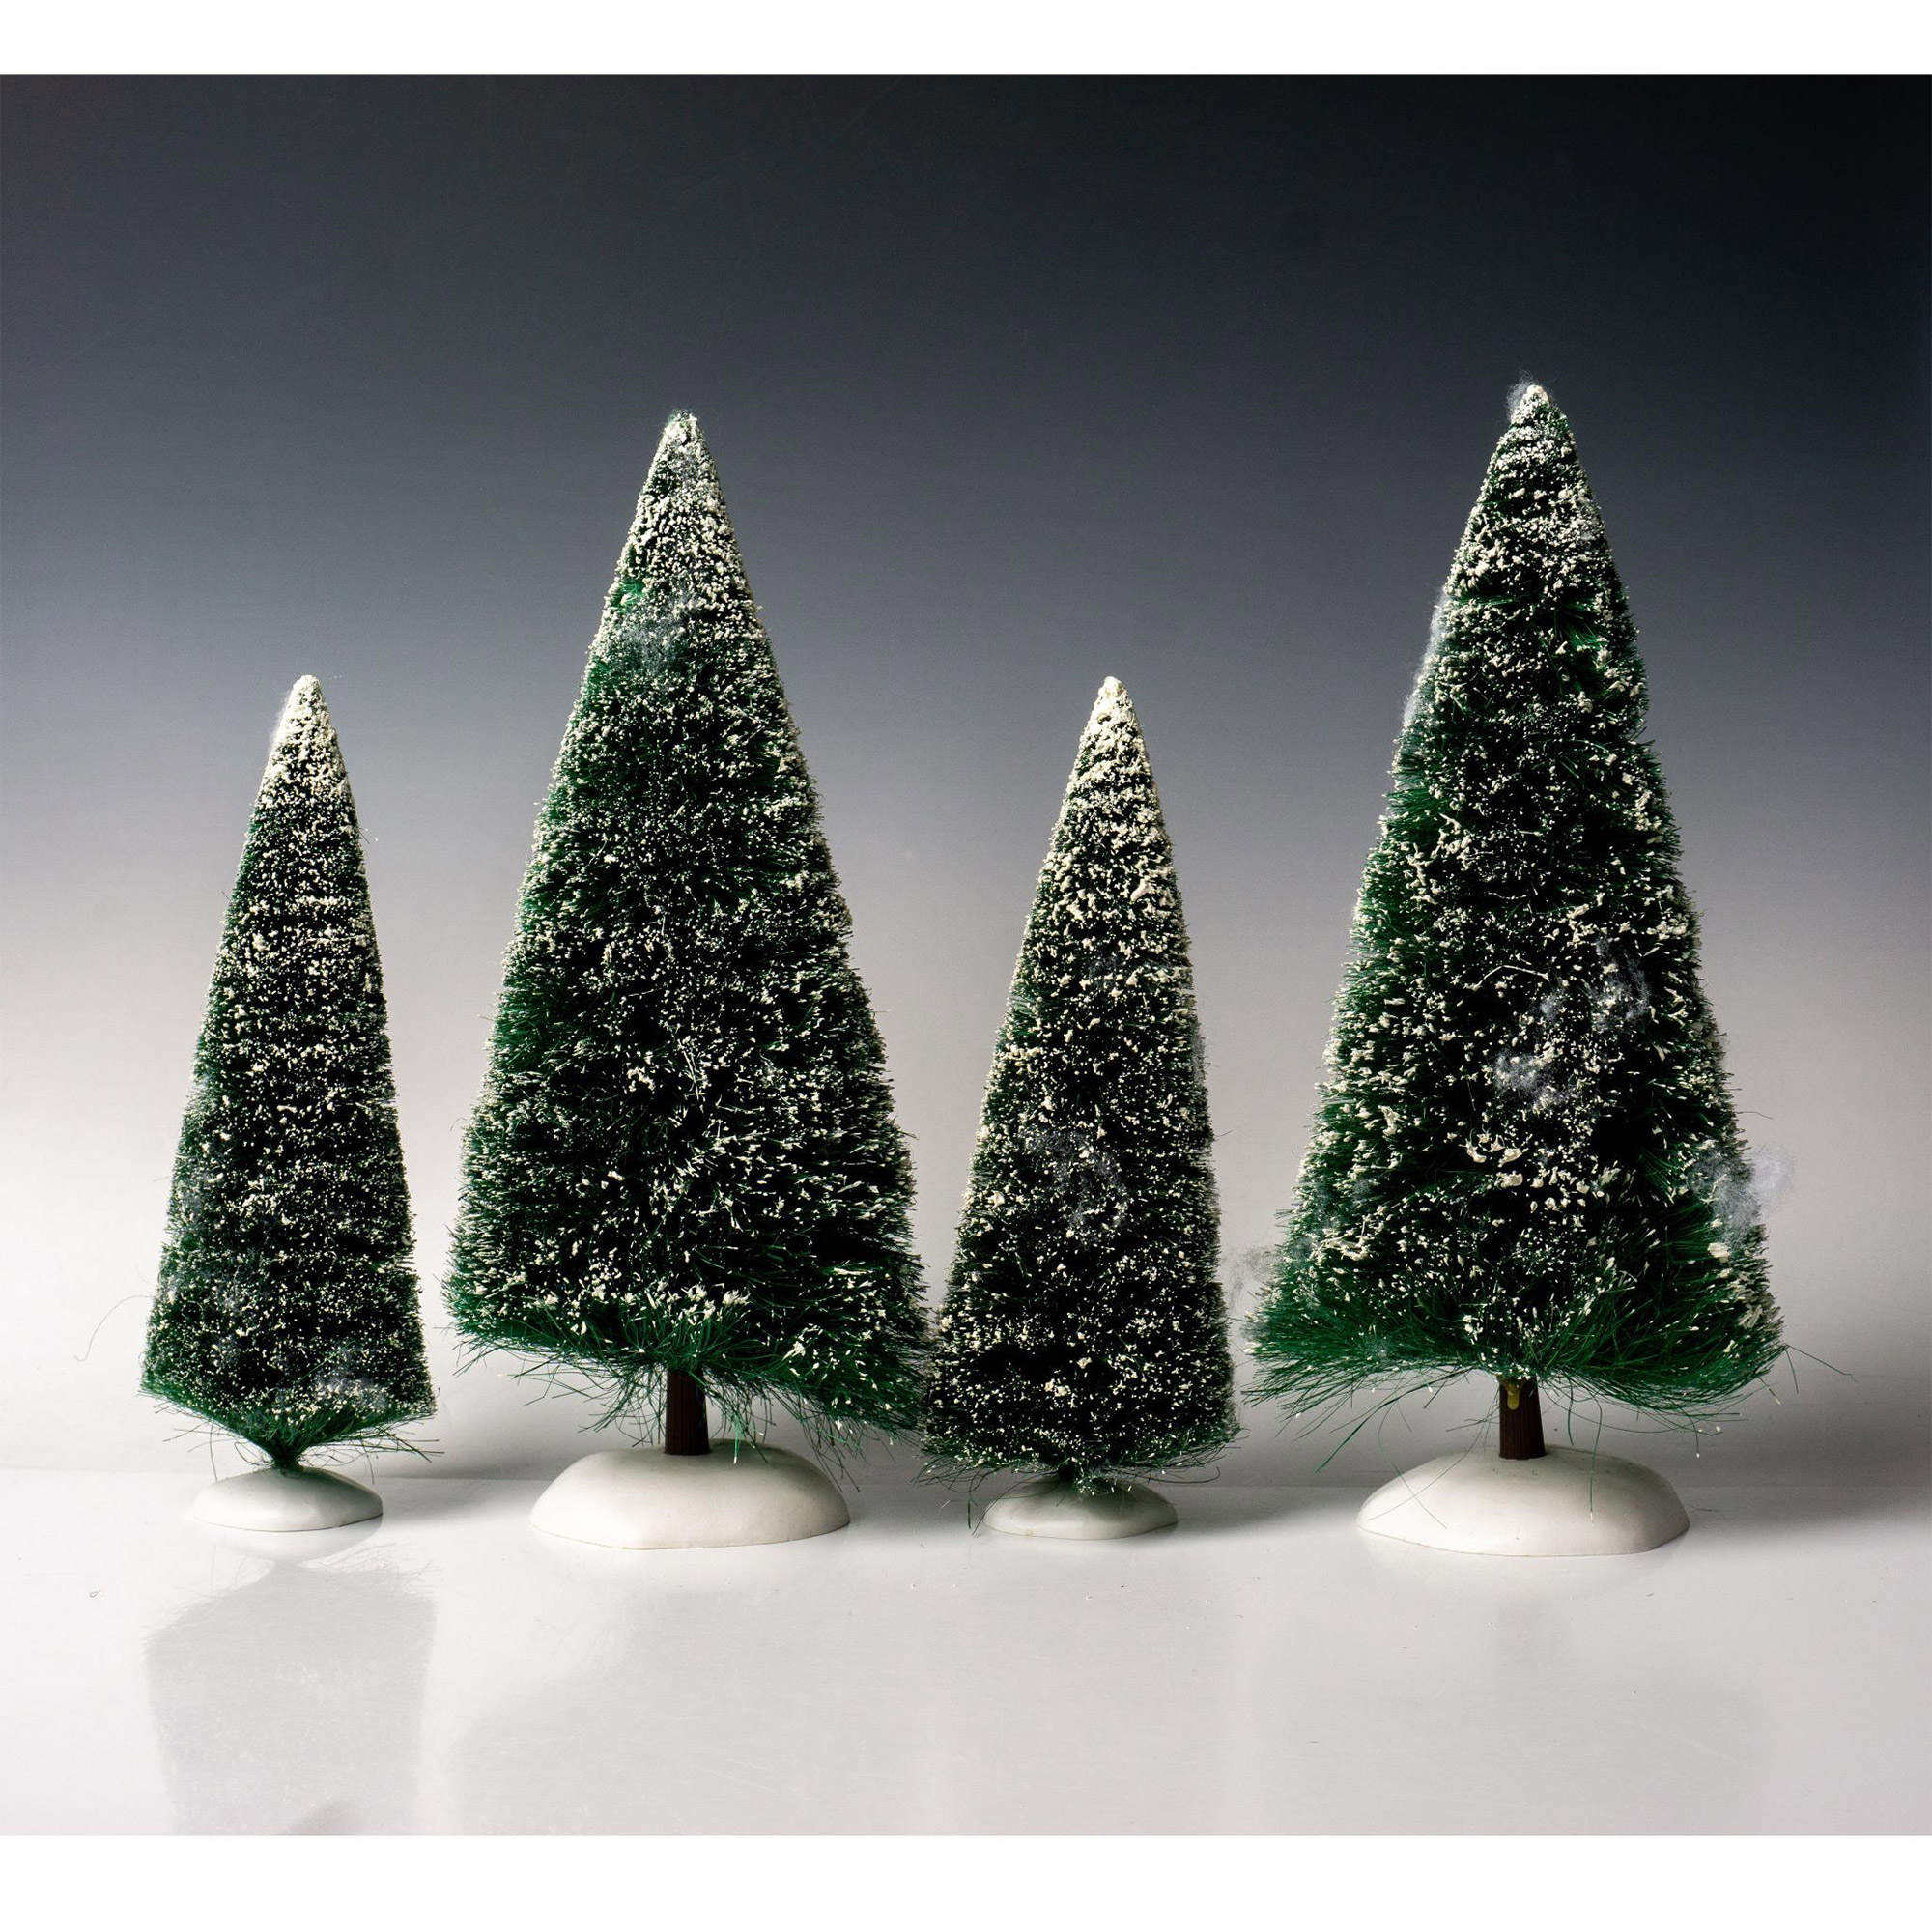 4pc Department 56 Accessory Figurines, Fir Trees